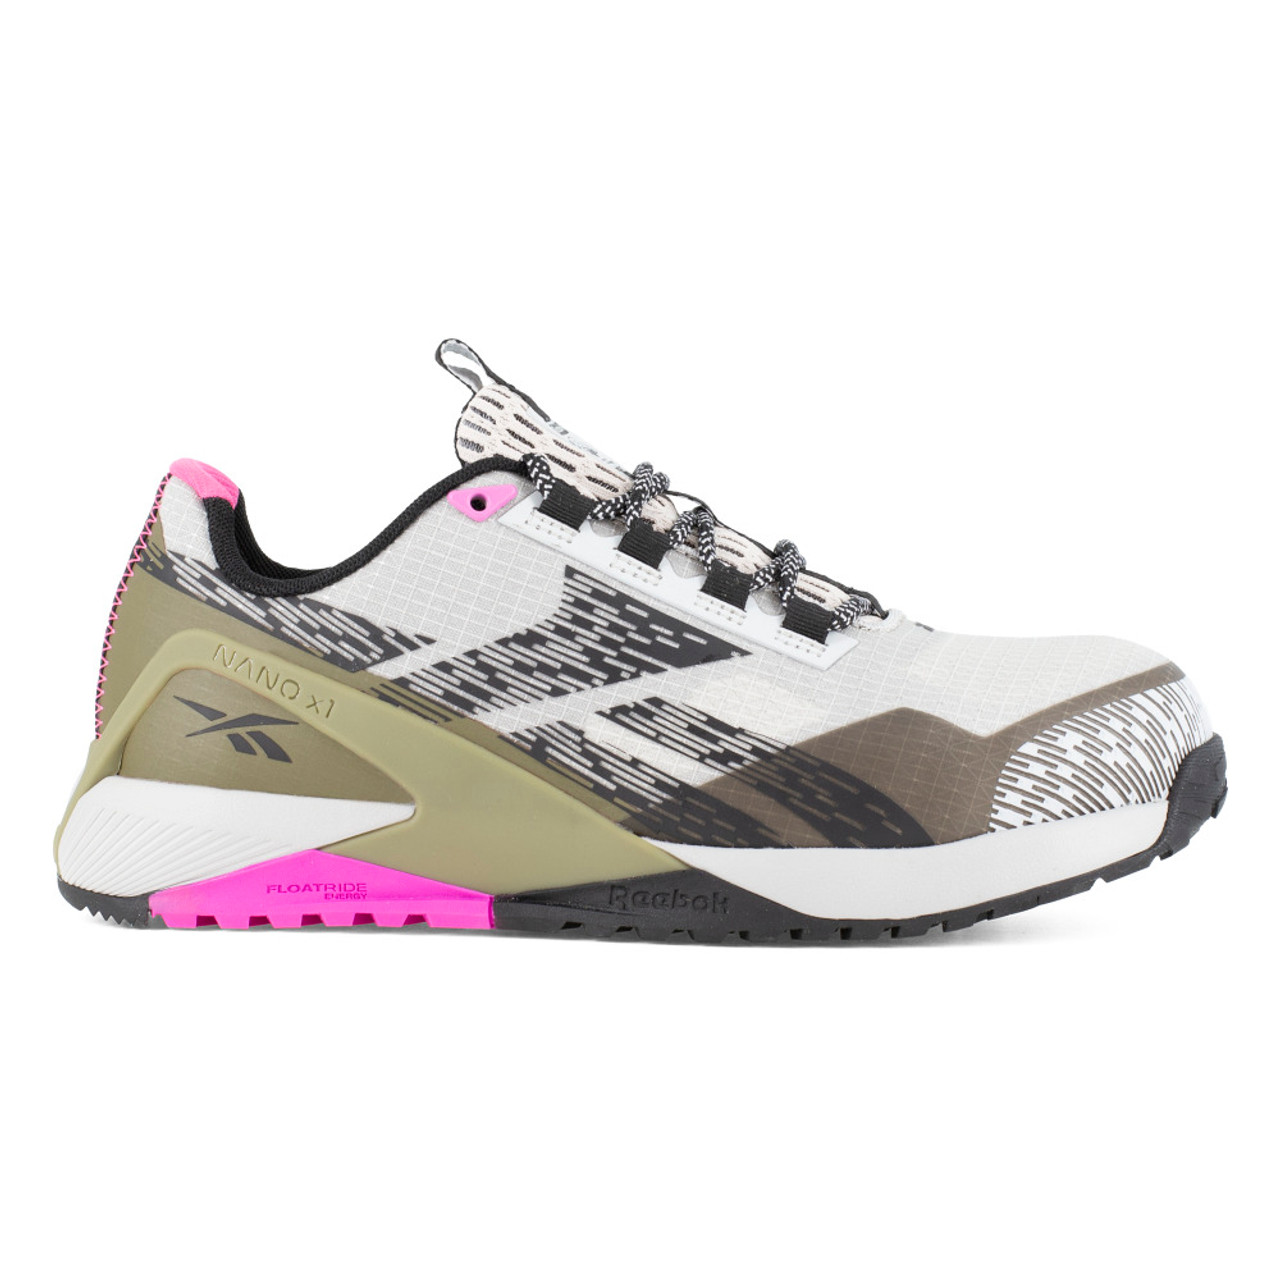 REEBOK NANO X1 ADVENTURE WORK WOMEN'S ATHLETIC SHOE SILVER/ARMY GREEN/PINK BOOTS RB383